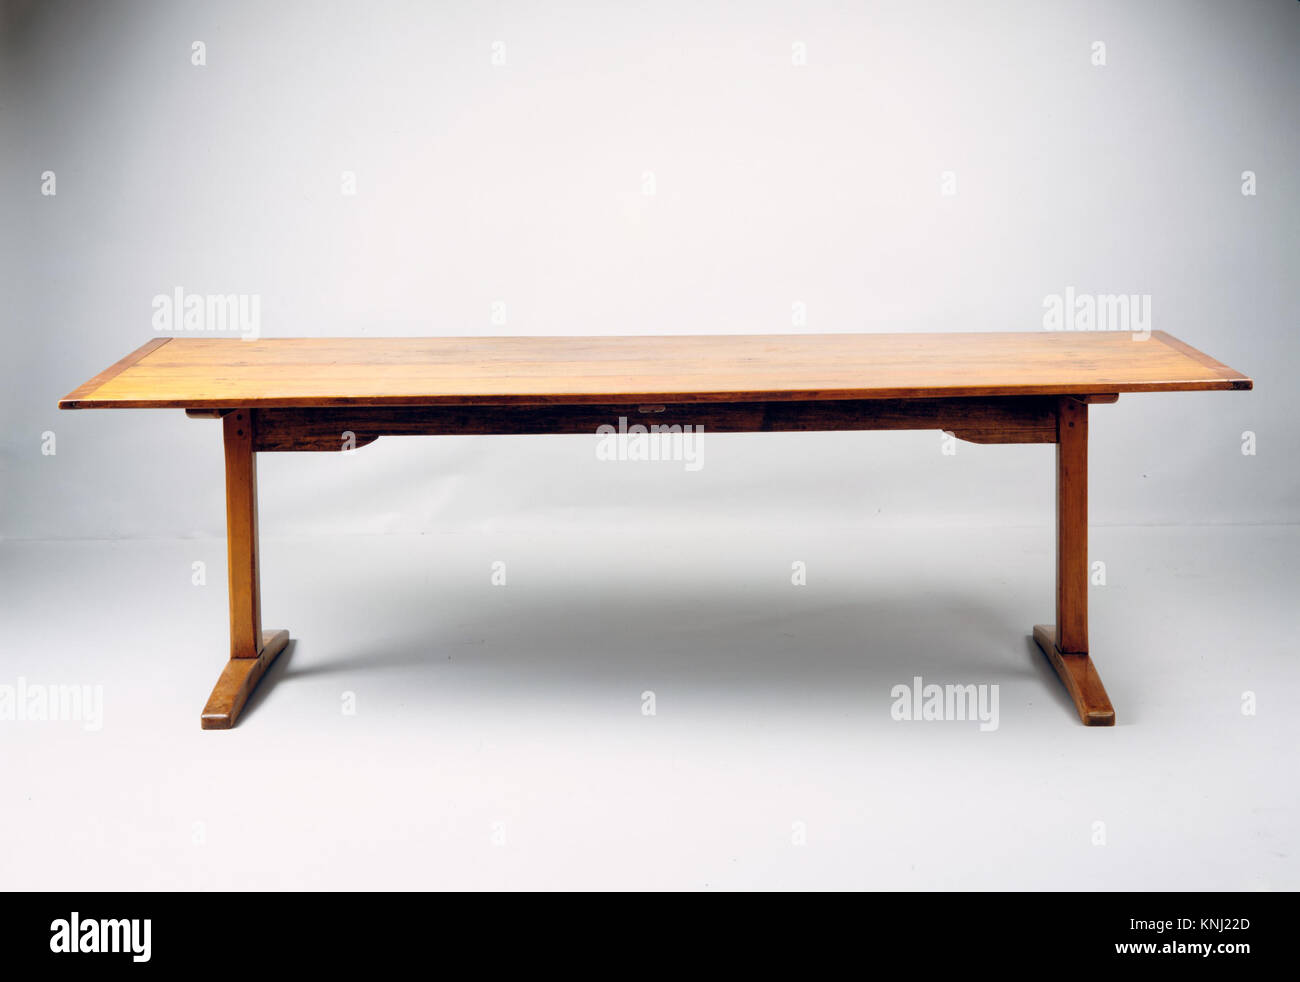 Dining Table, Maker: United Society of Believers in Christ’s Second Appearing (“Shakers”) (American, active ca. 1750–present), 1800–1825, American, Shaker, Made in Hancock, Massachusetts, United States,  Medium: Pine, maple, basswood Stock Photo